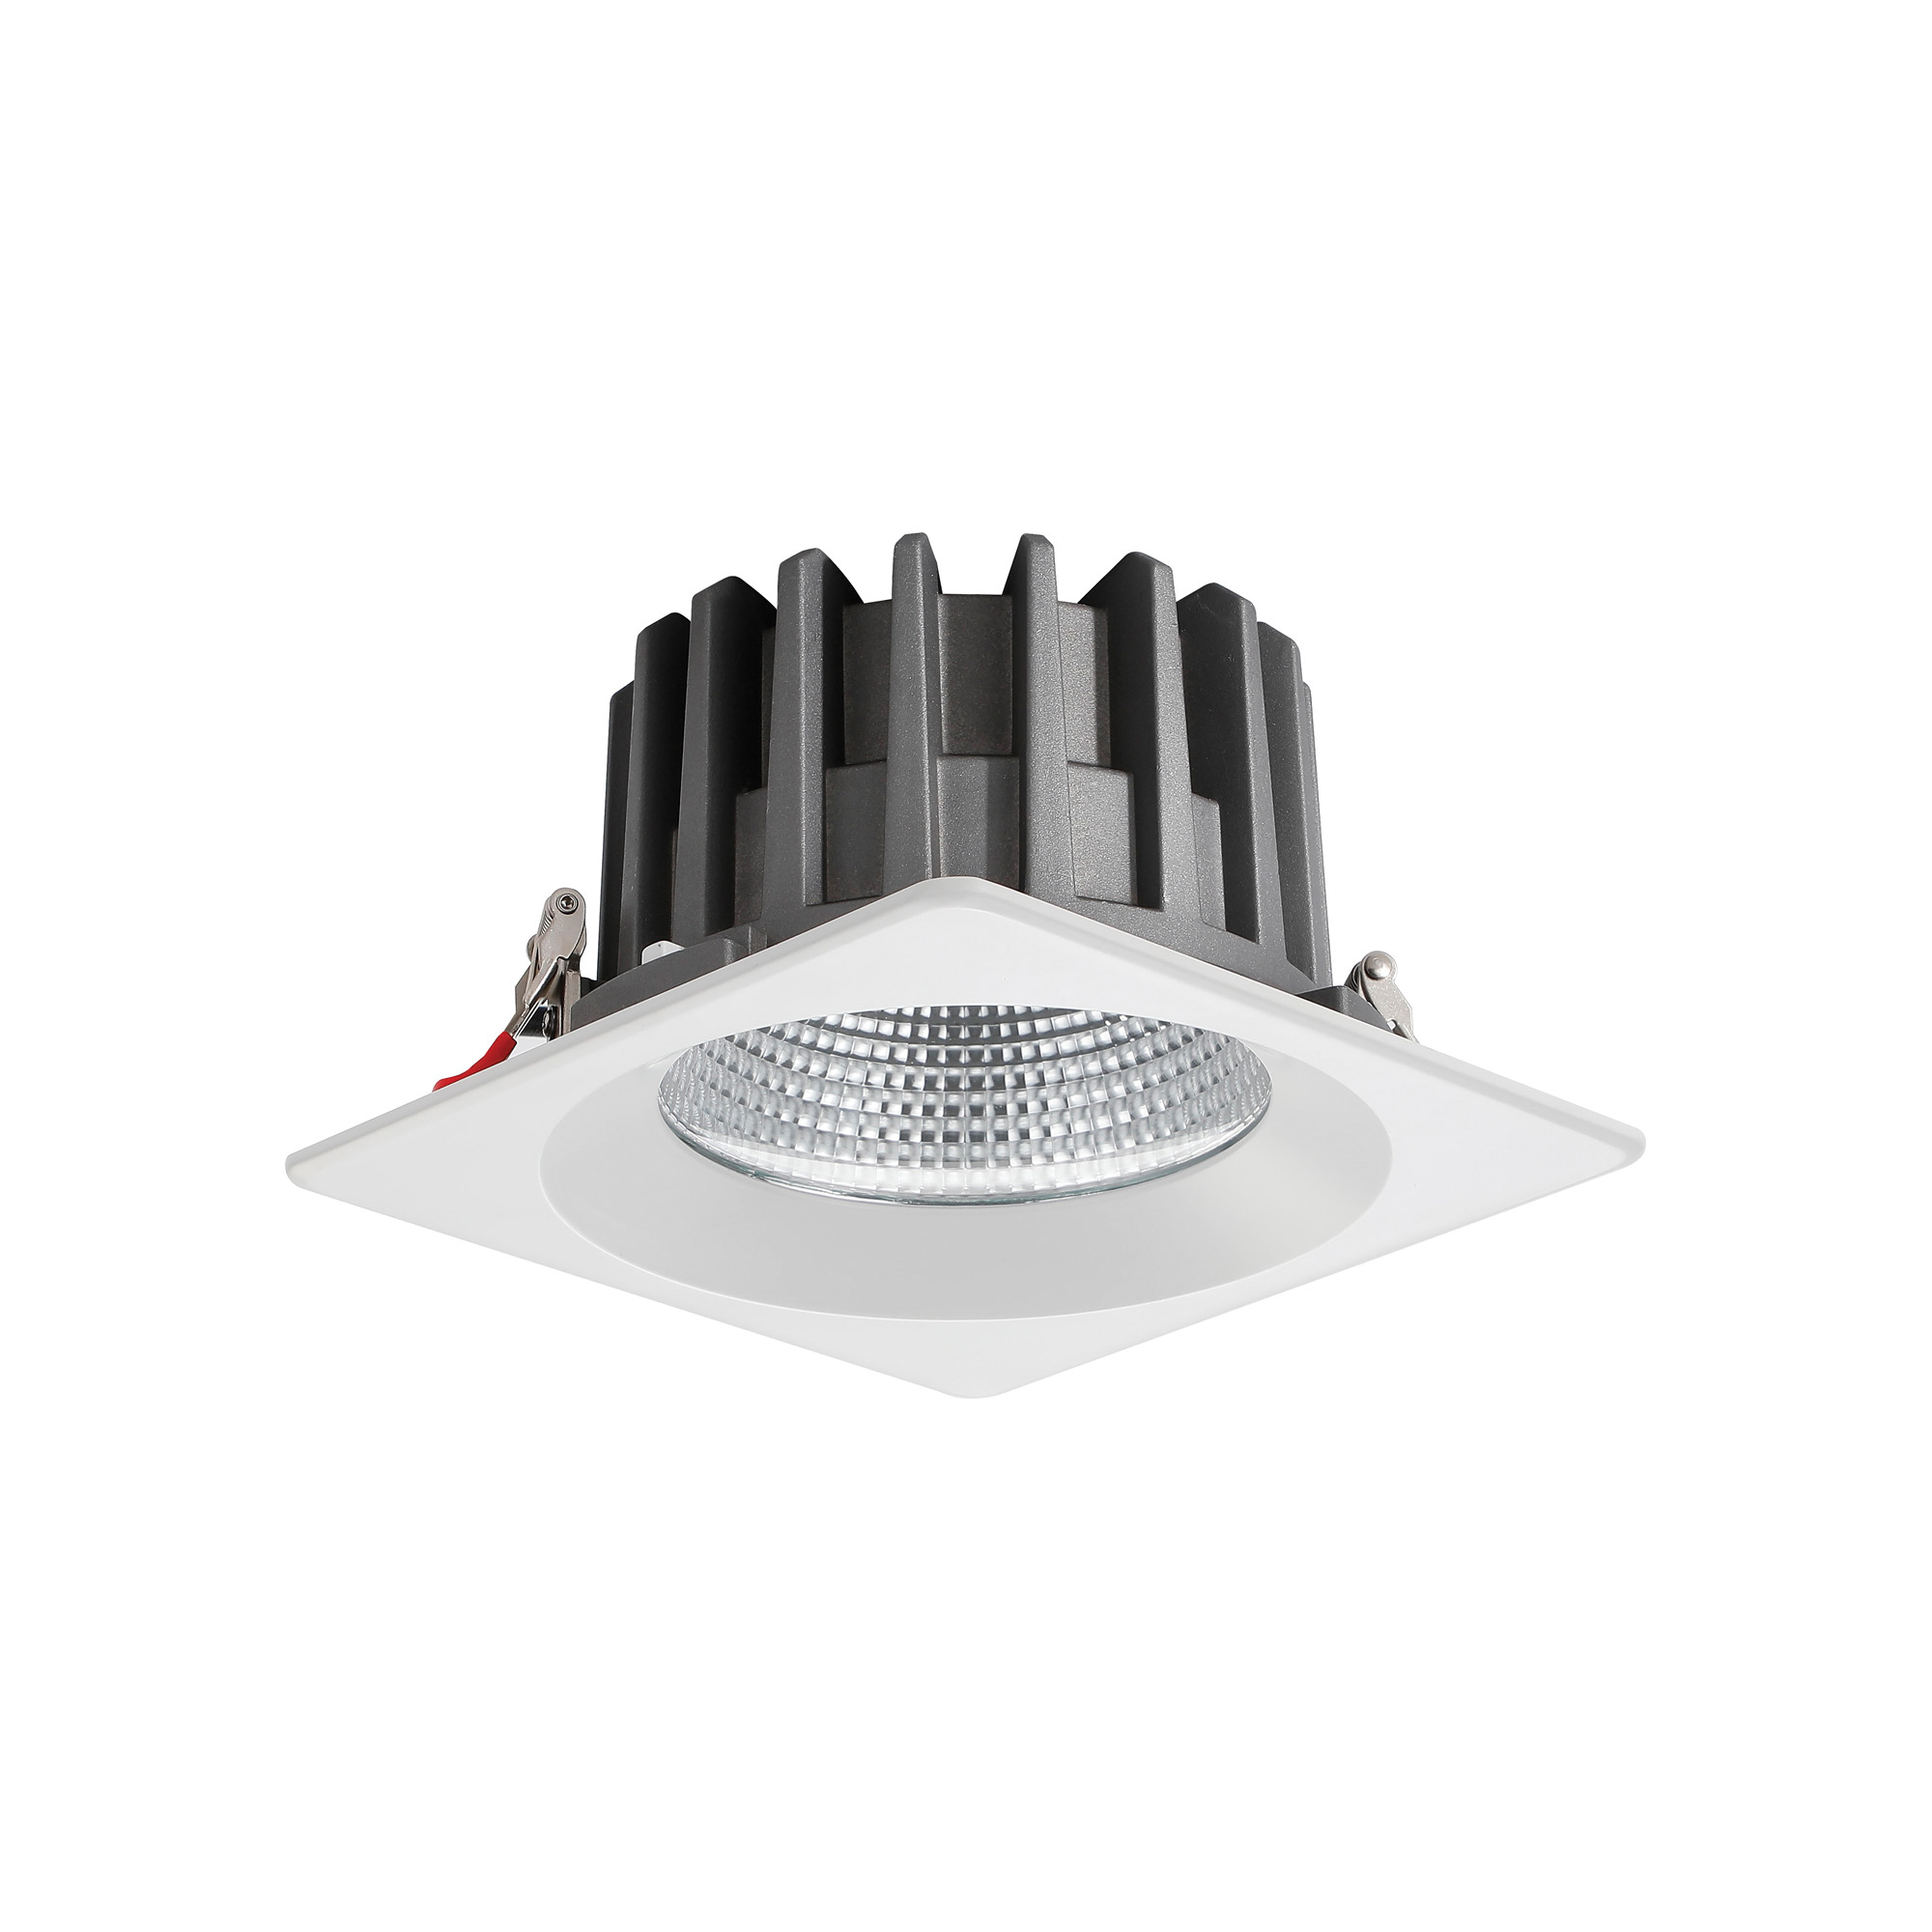 DL200081  Bionic 40; 40W; 1000mA; White Deep Square Recessed Downlight; 3600lm ;Cut Out 175mm; 40° ; 5000K; IP44; DRIVER INC.; 5yrs Warranty.